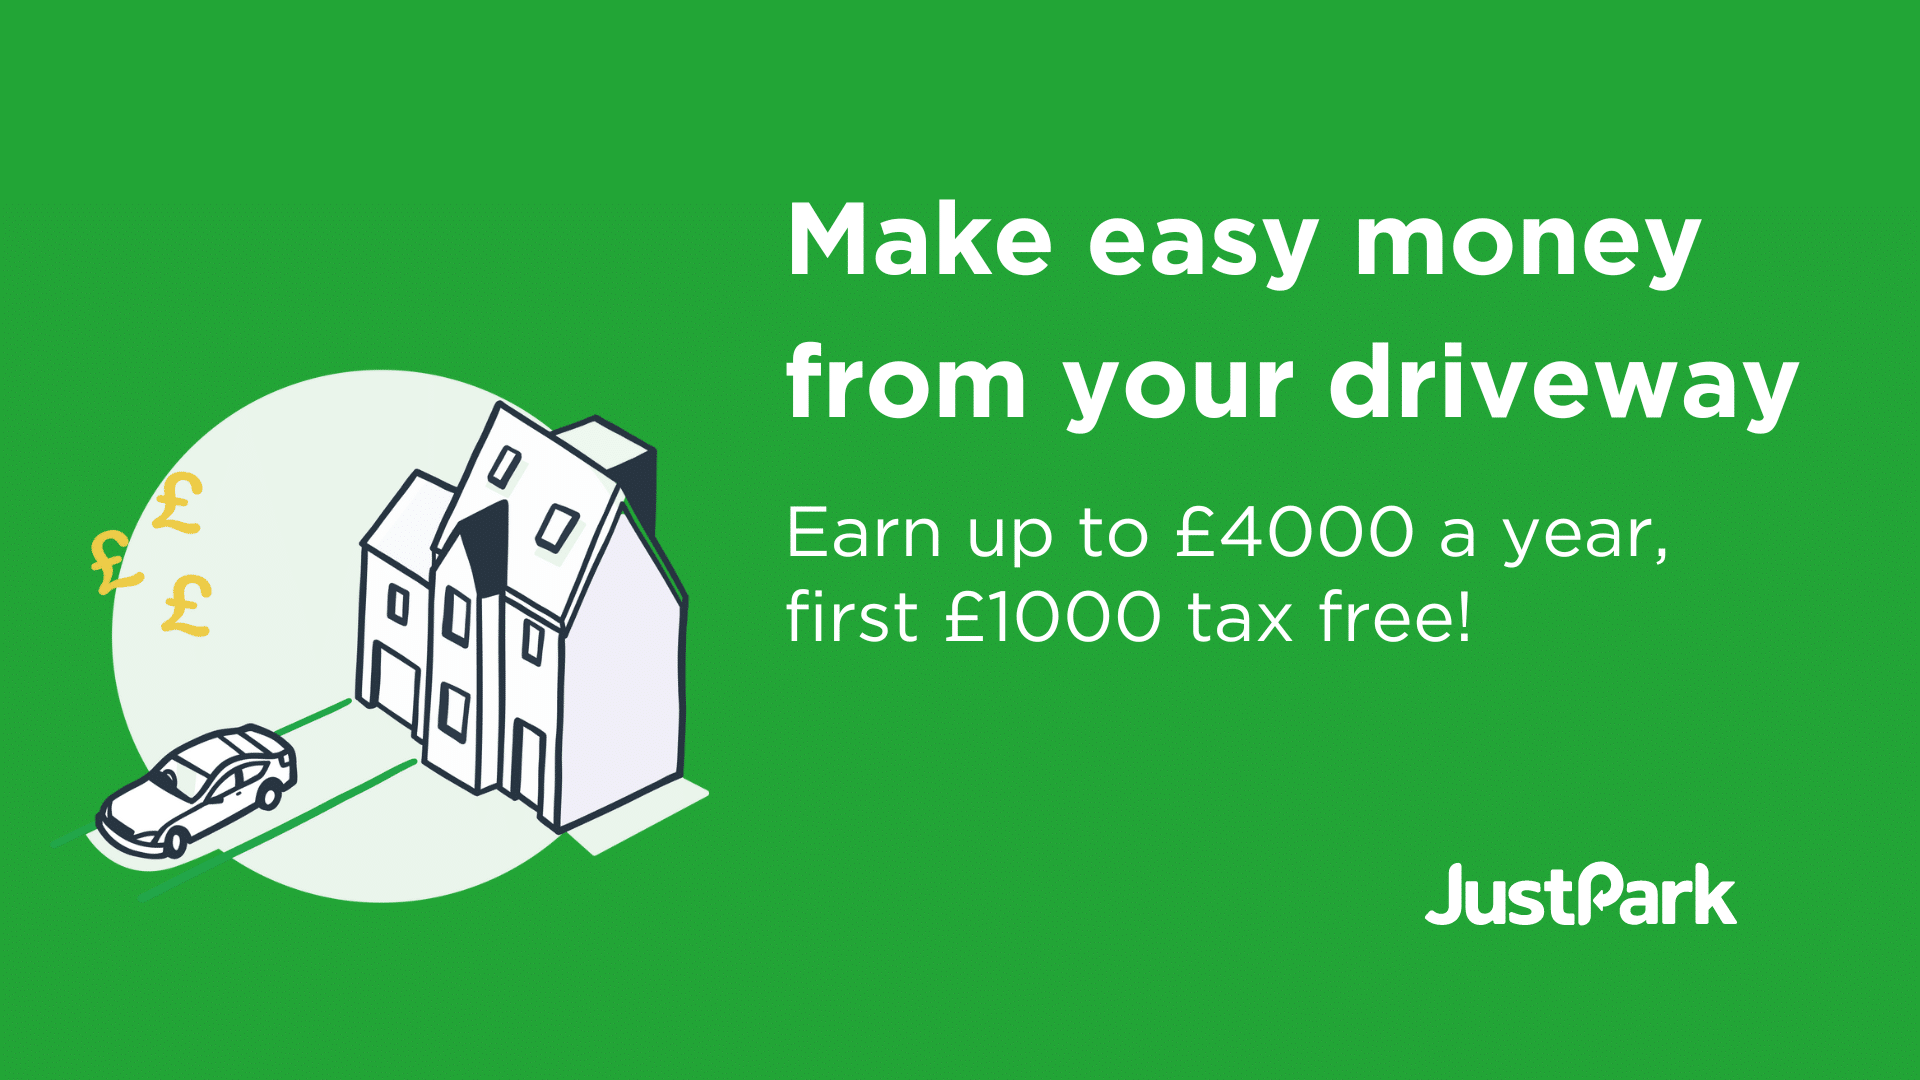 JustPark make it easy to rent out your parking space or driveway